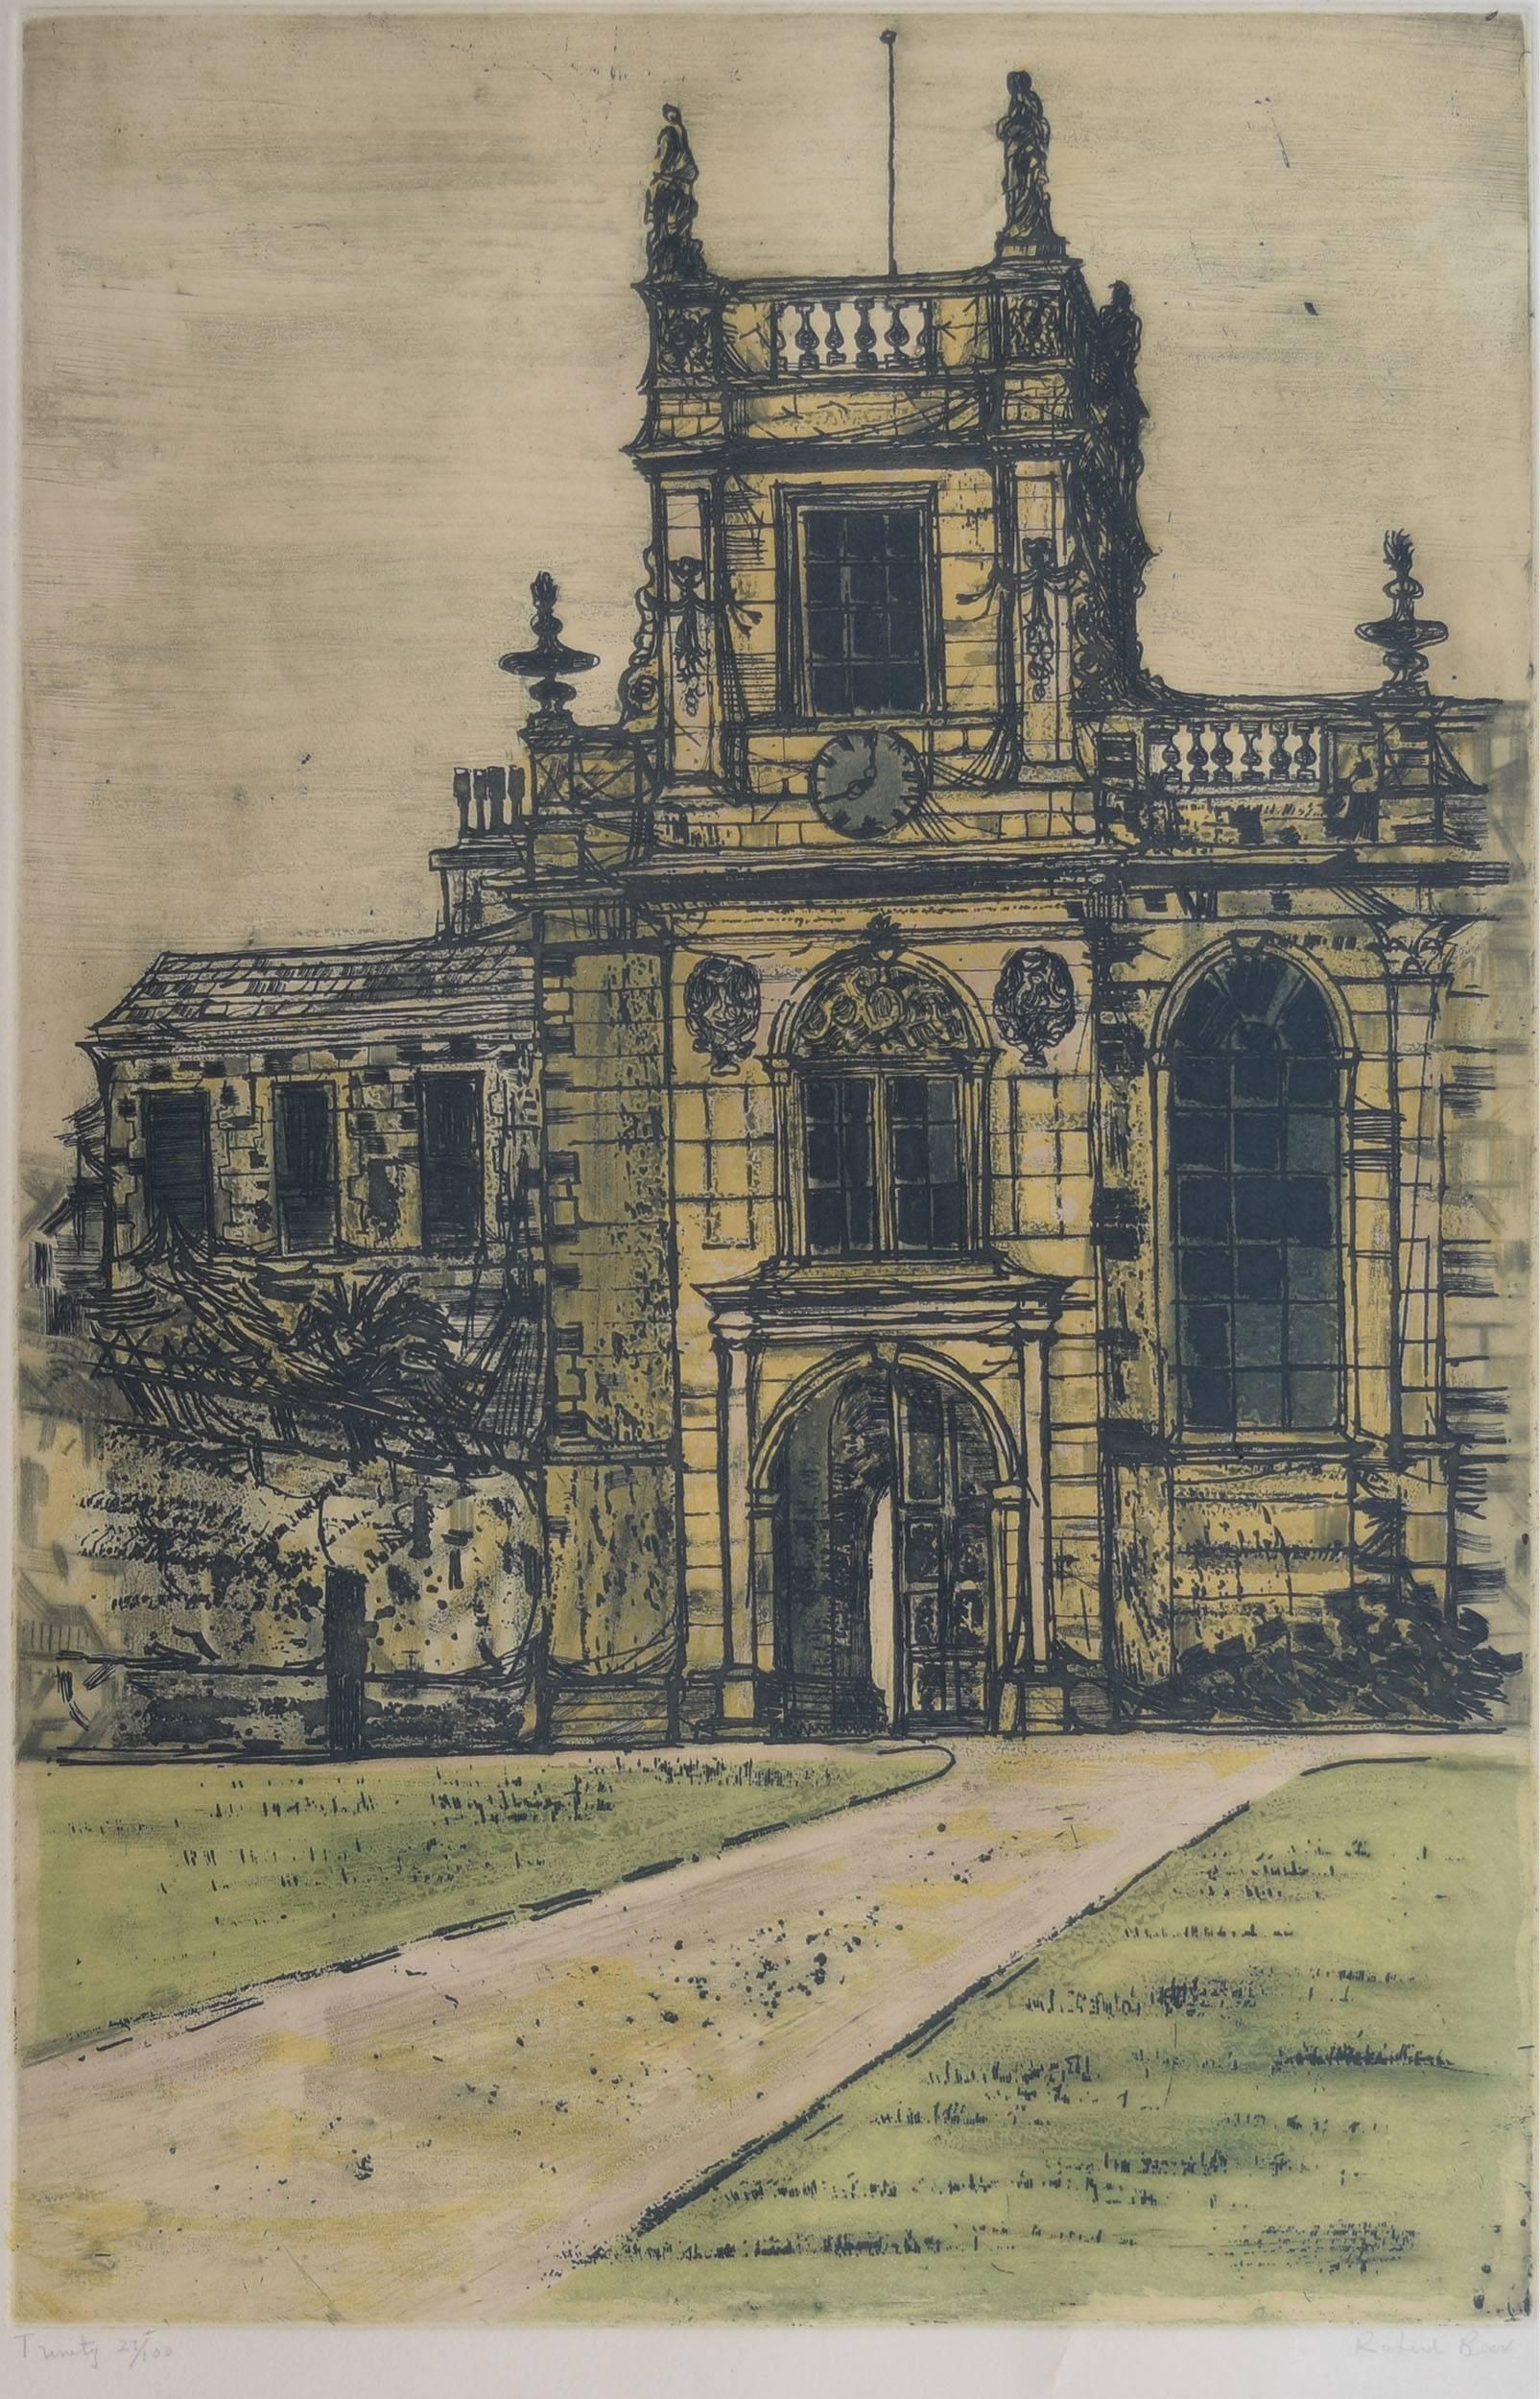 To see our other views of Oxford and Cambridge, scroll down to "More from this Seller" and below it click on "See all from this seller" - or send us a message if you cannot find the view you want.

Richard Beer (1928 - 2017)
Trinity College,